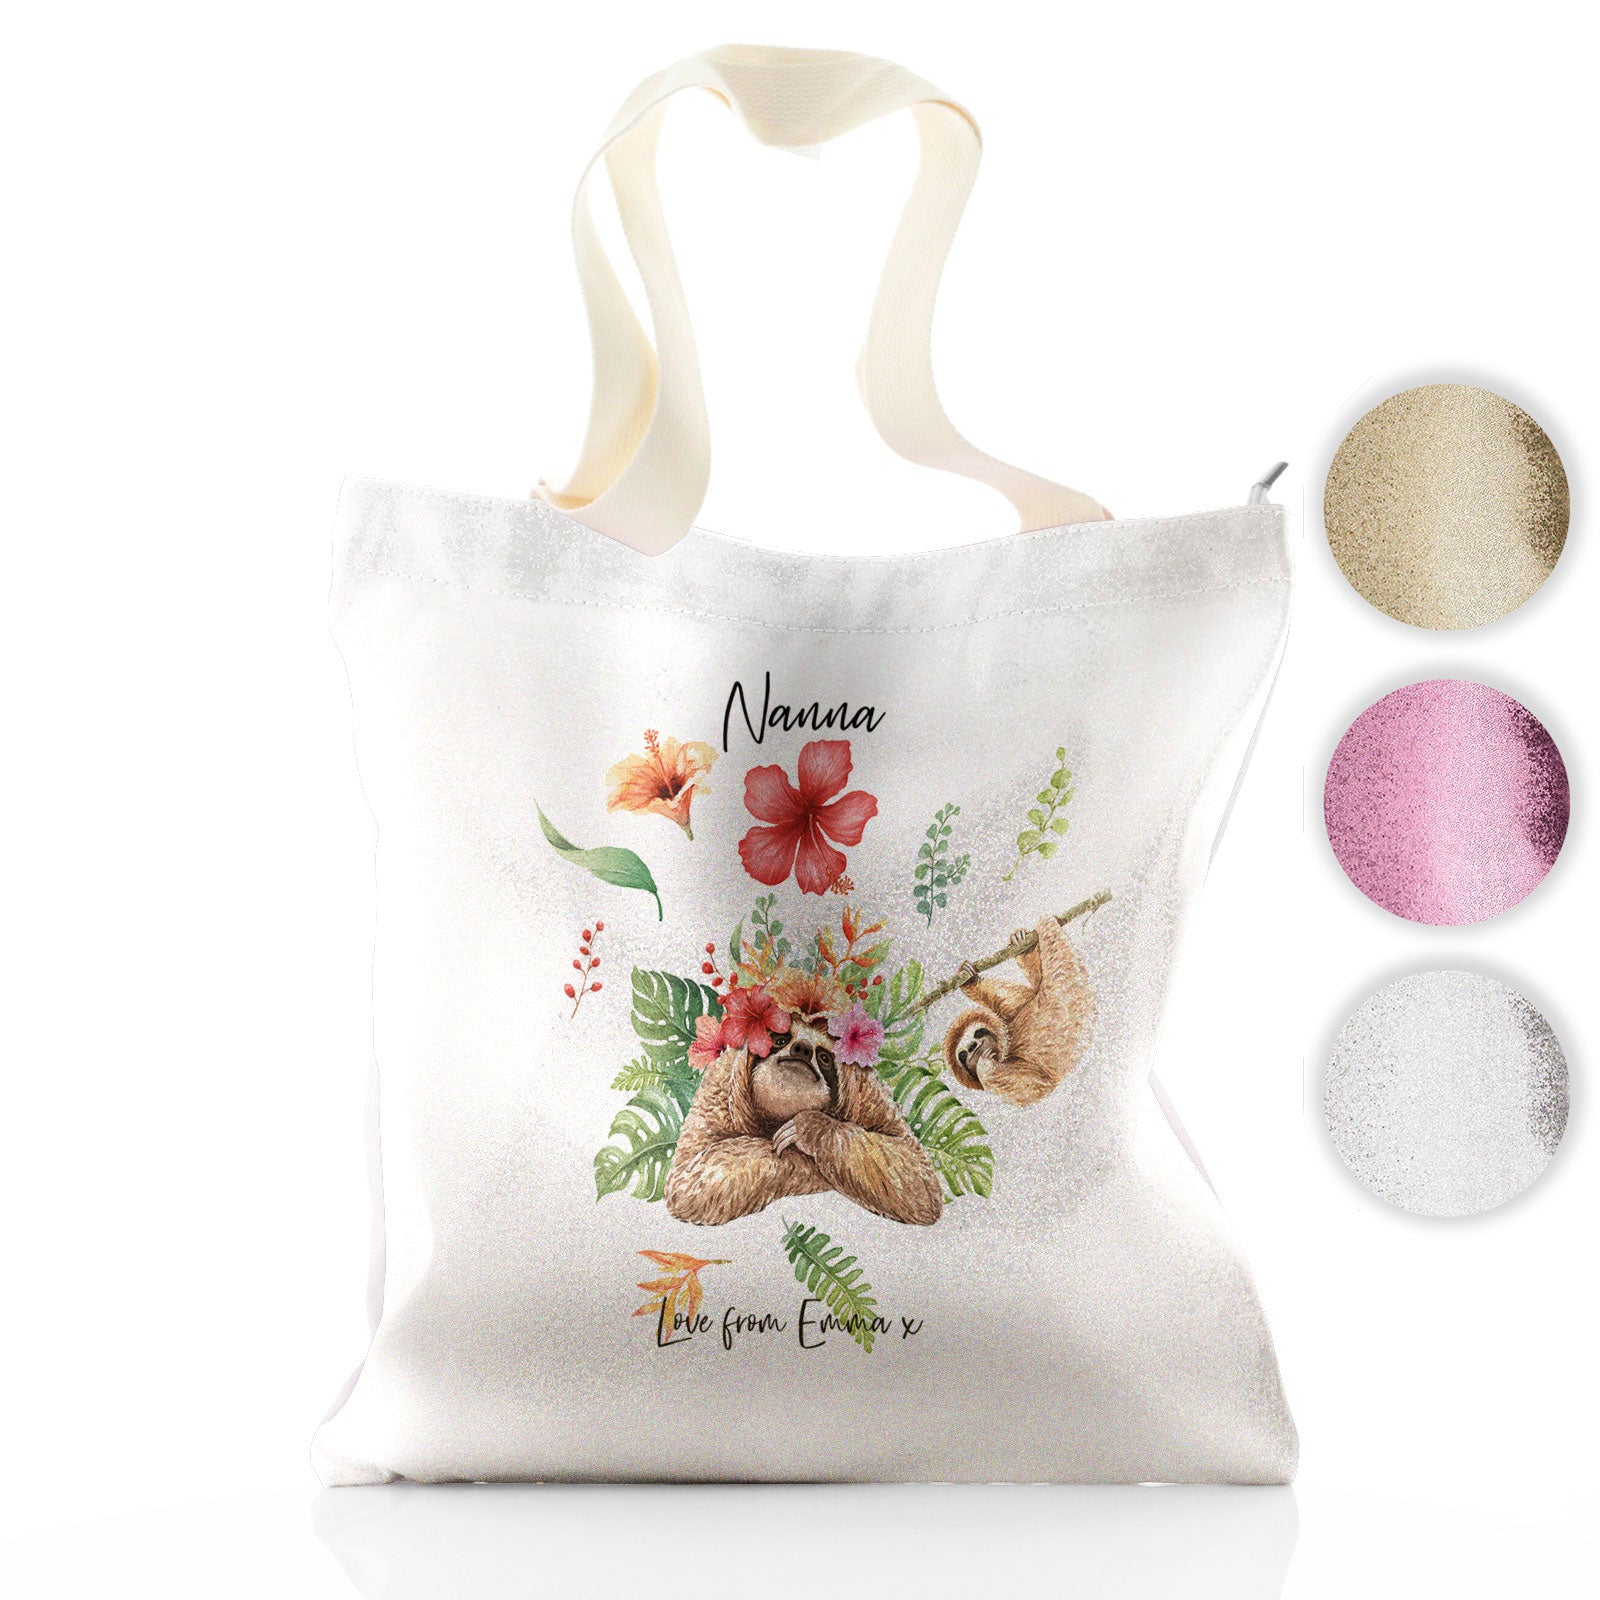 Personalised Glitter Tote Bag with Stylish Text and Floral Mum and Baby Sloths